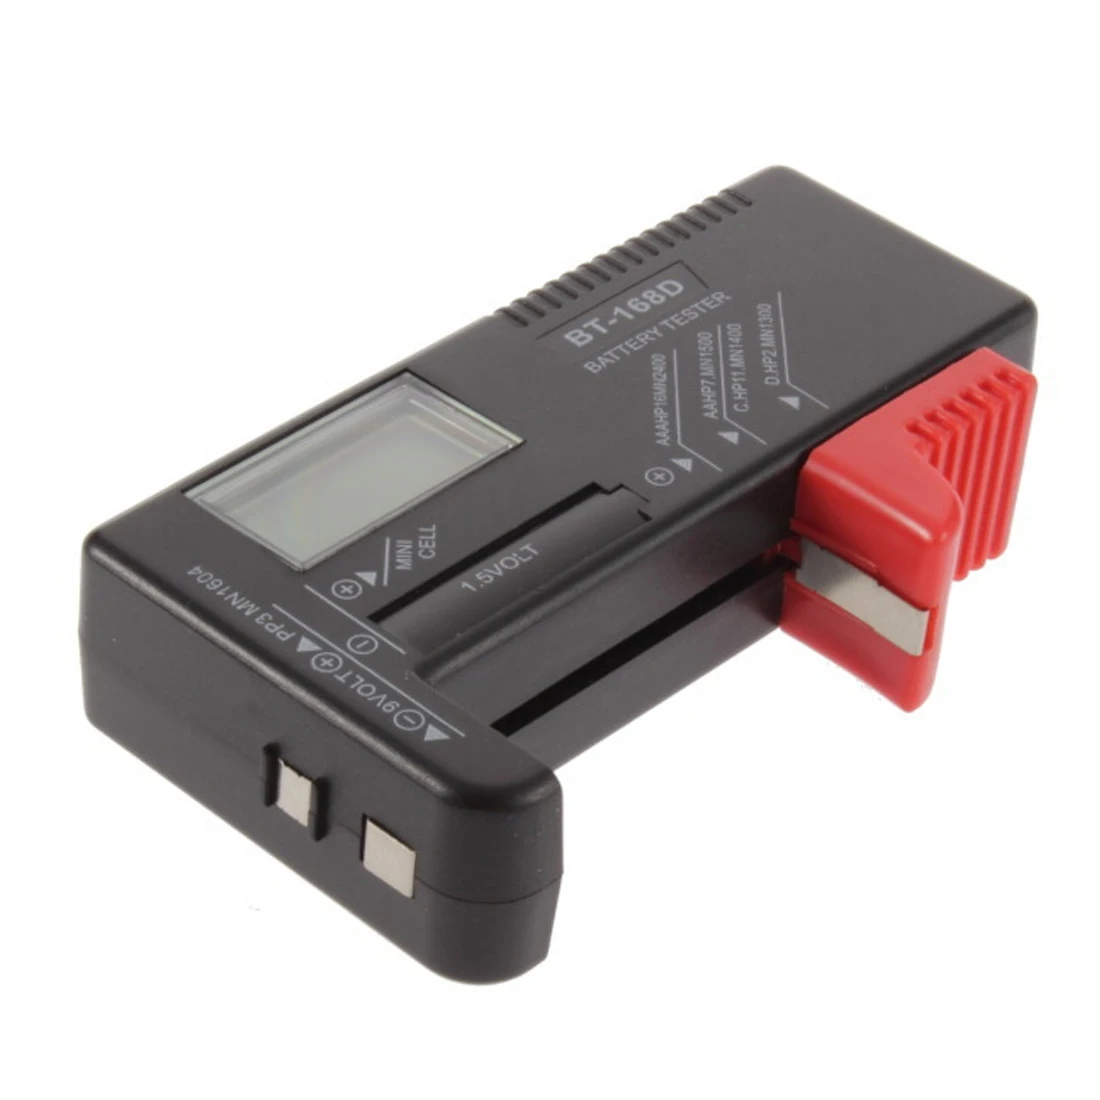 

Battery tester 1pc Universal LCD AA/AAA/C/D/9V/1.5V Button Cell Battery Tester BT-168D Digital display battery capacity tester